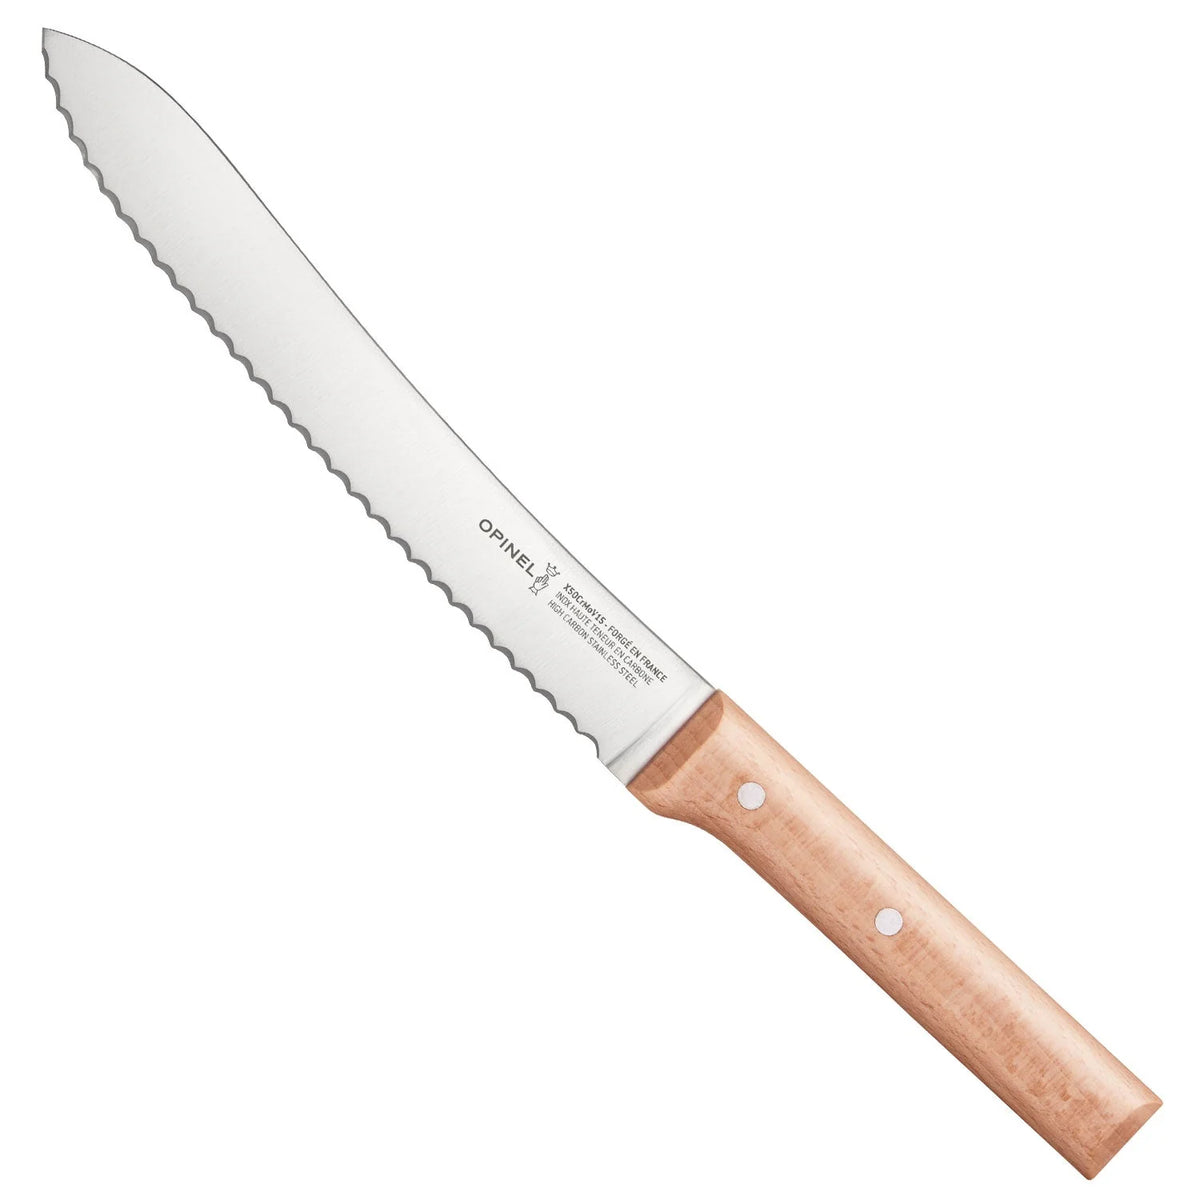 Opinel Forged 1890 Chef's Knife - 8